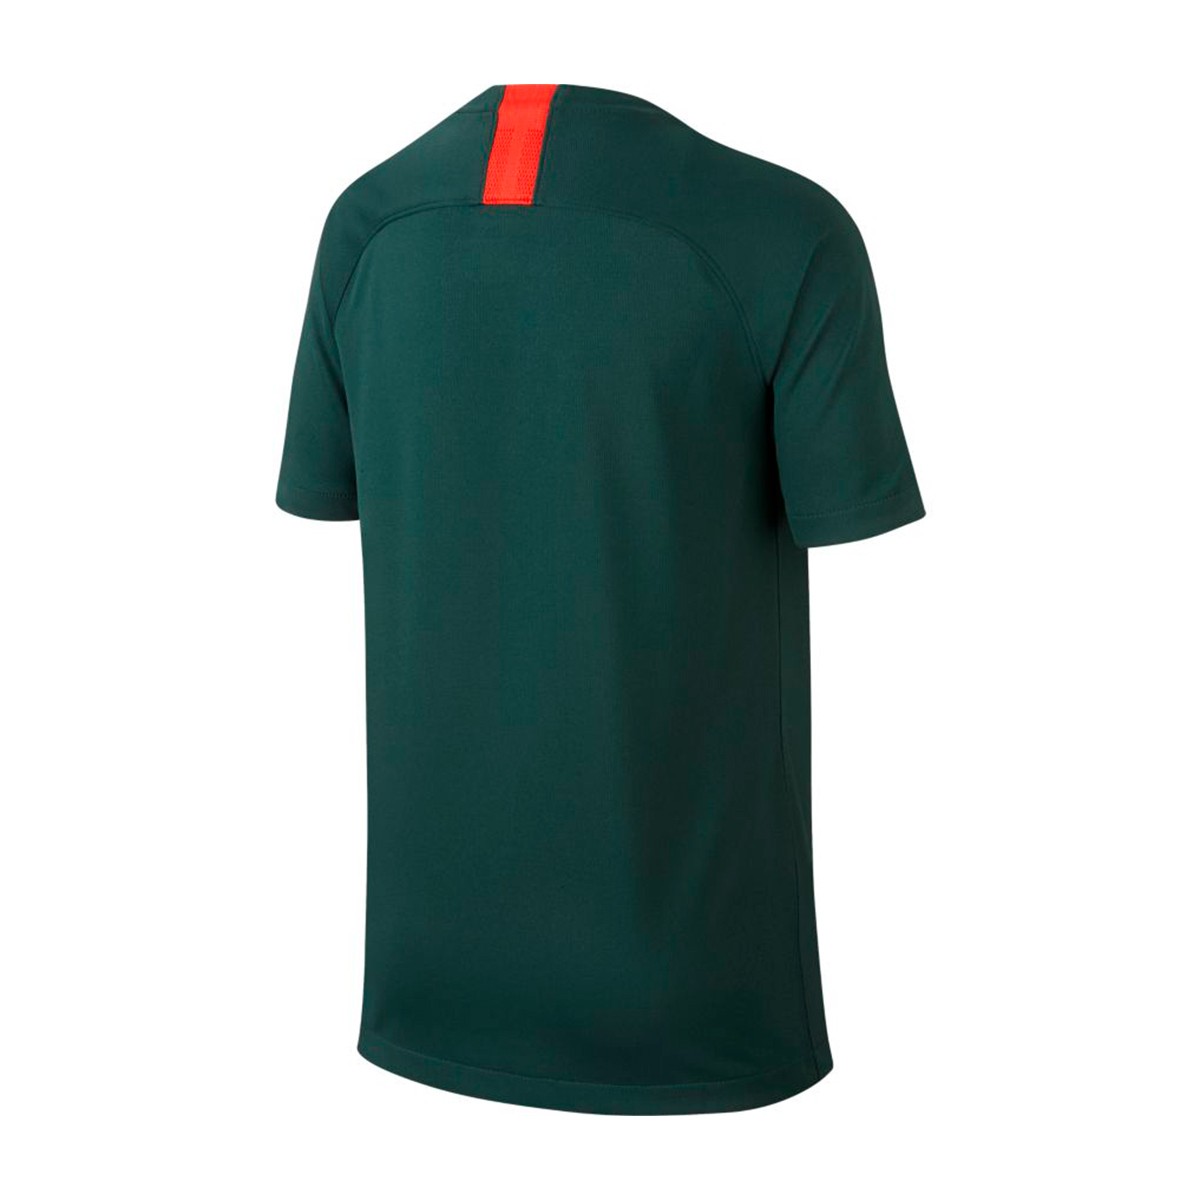 green and gold football jersey